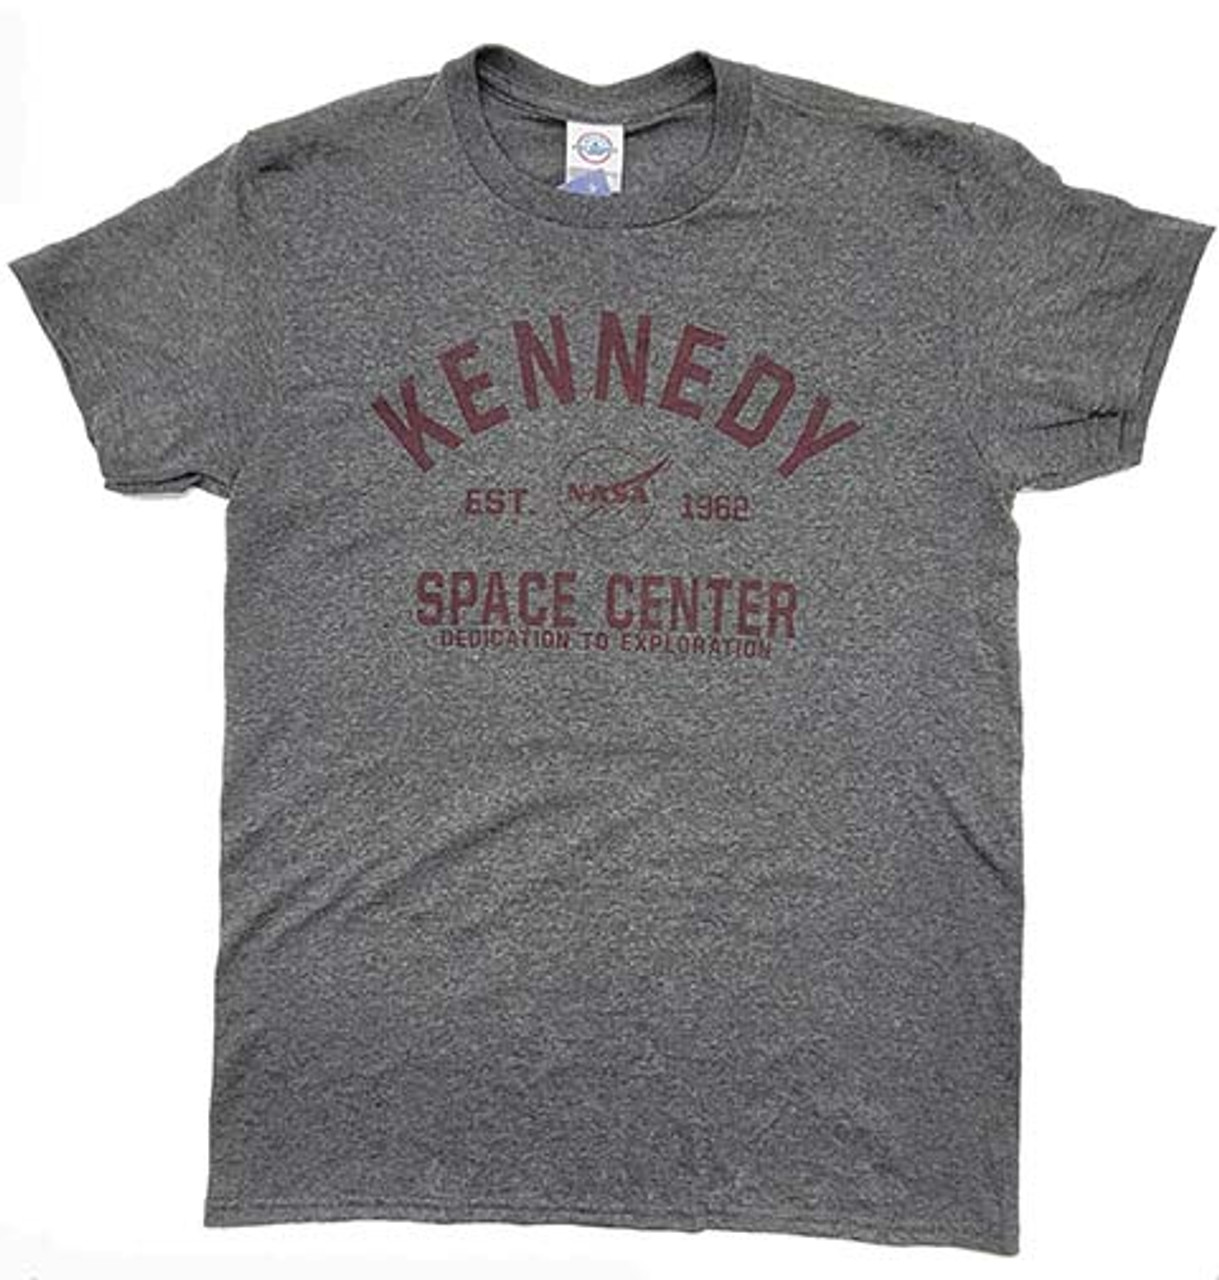 Kennedy Space Center Est. 1962 Tee Charcoal 